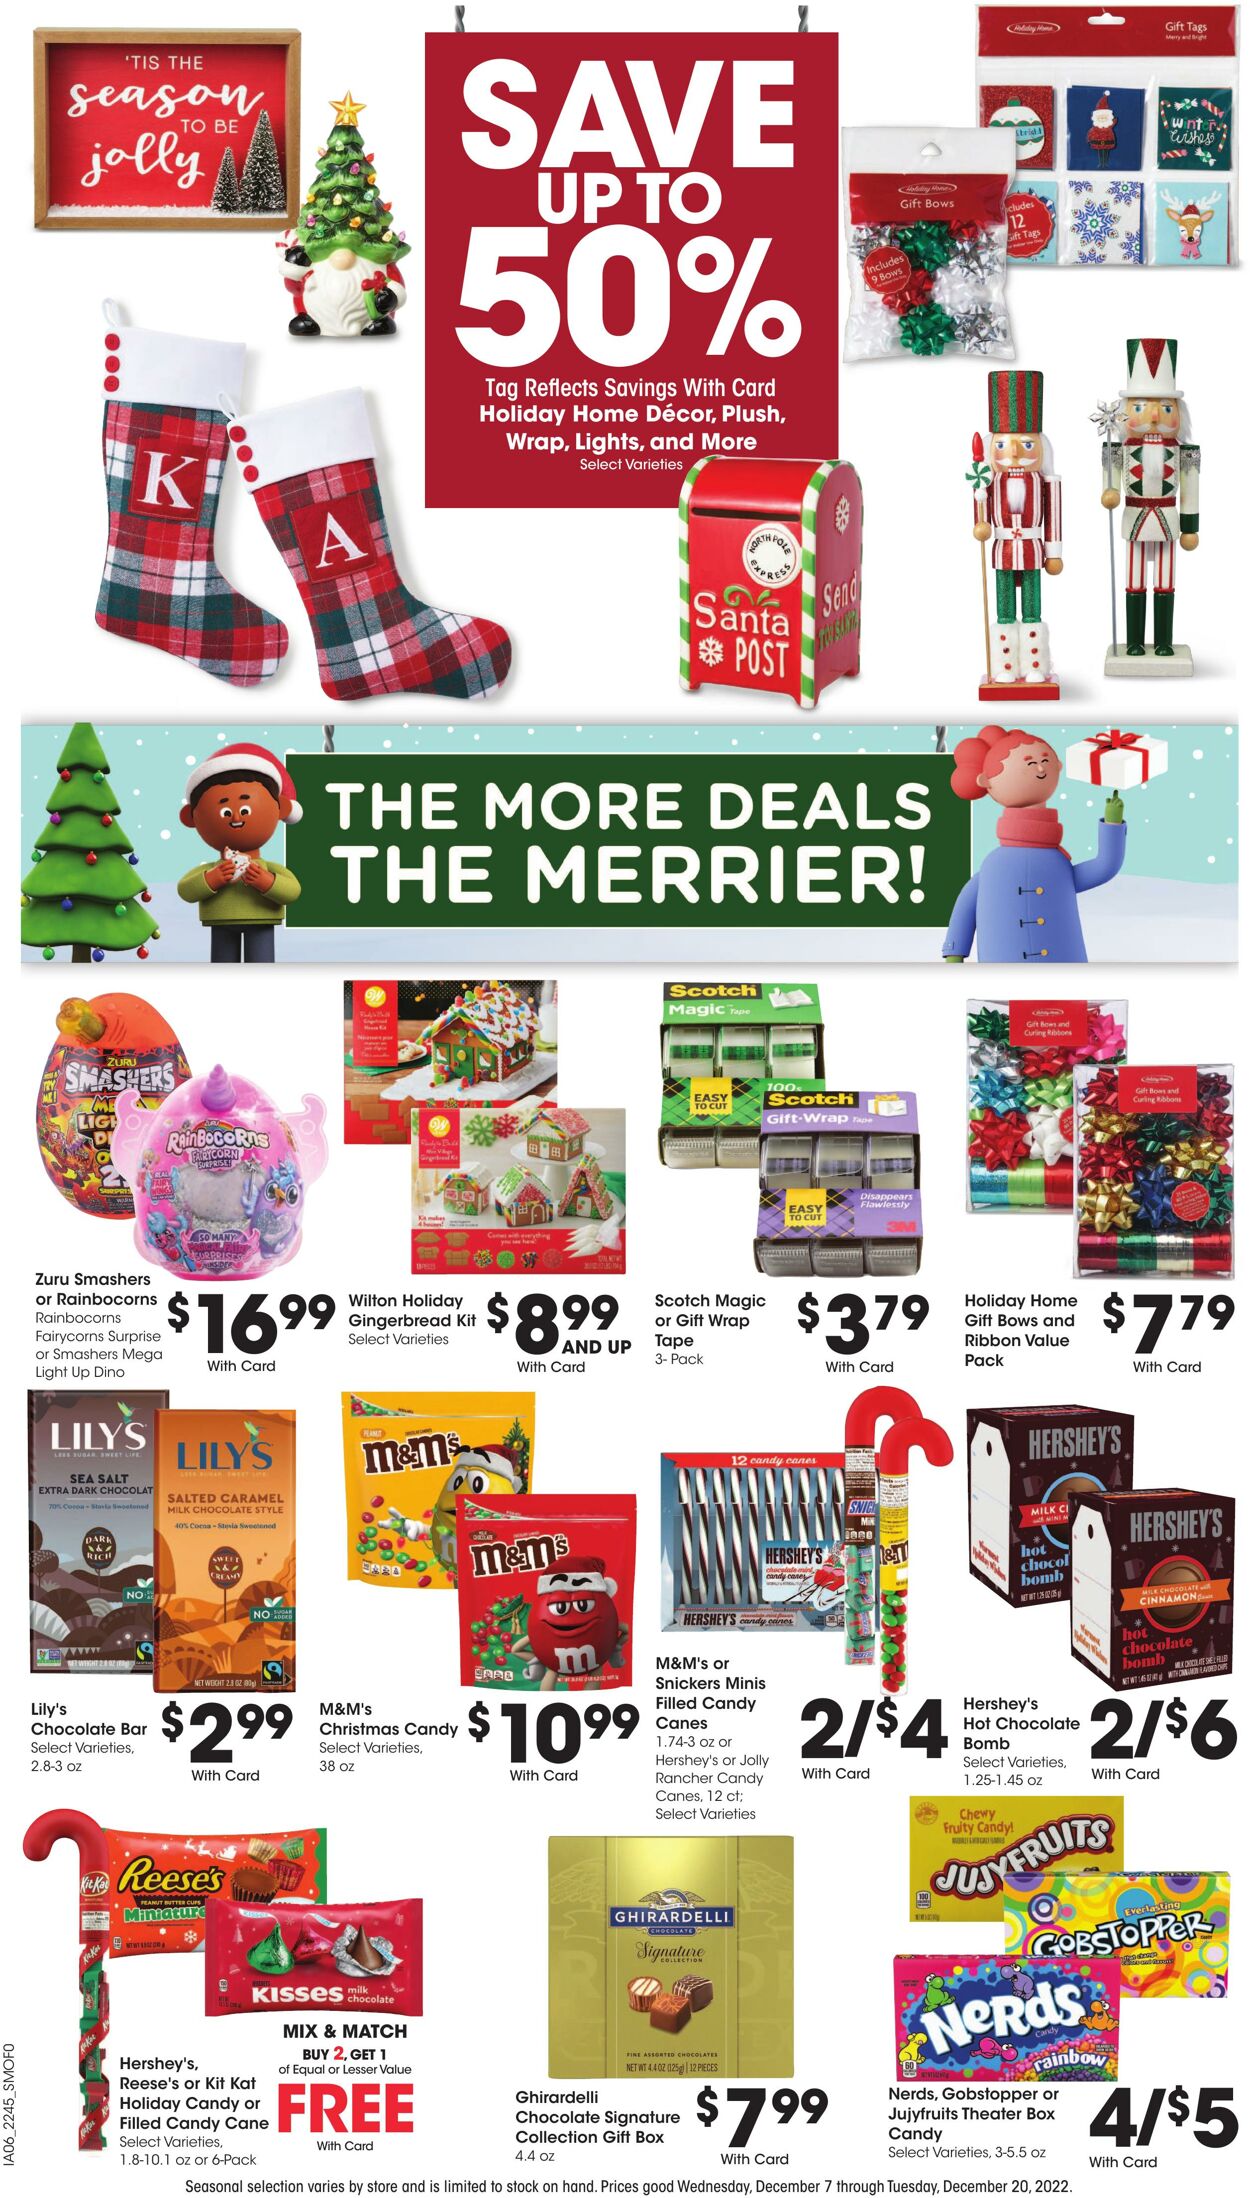 Weekly ad Smith’s Food and Drug 12/07/2022 - 12/13/2022